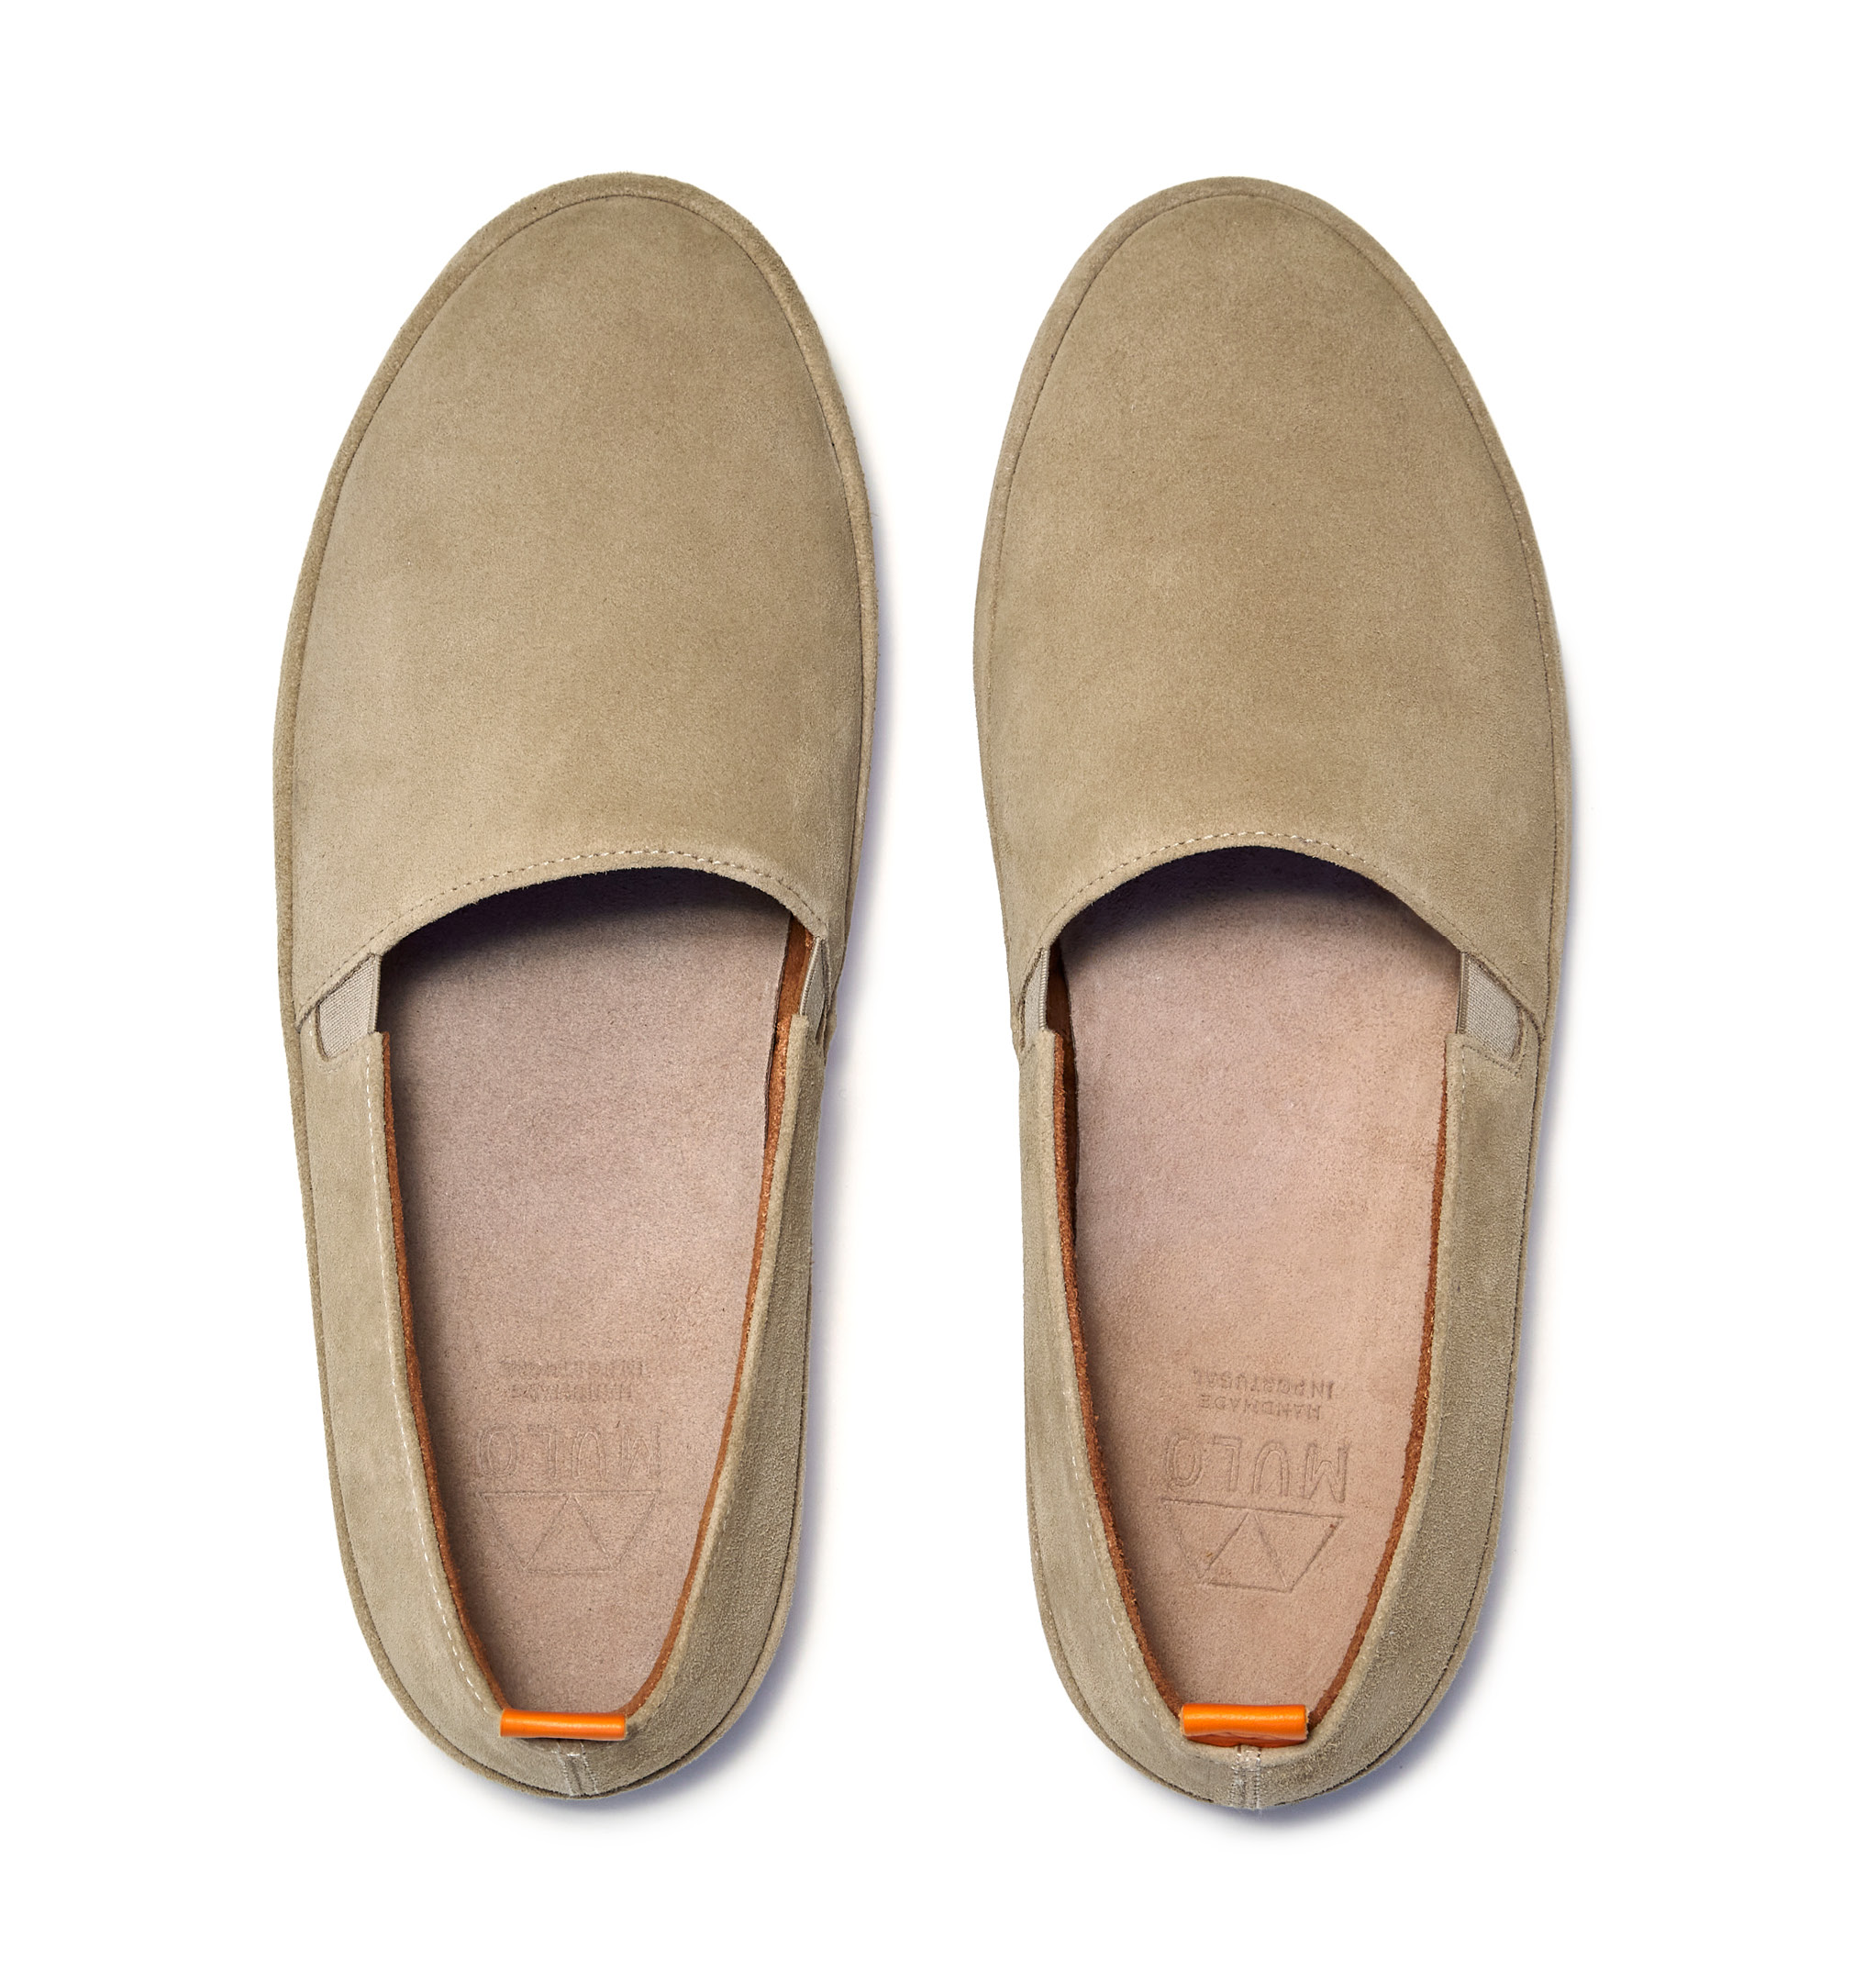 Tag 7 Mens Tan Leather Loafers 10 Tan